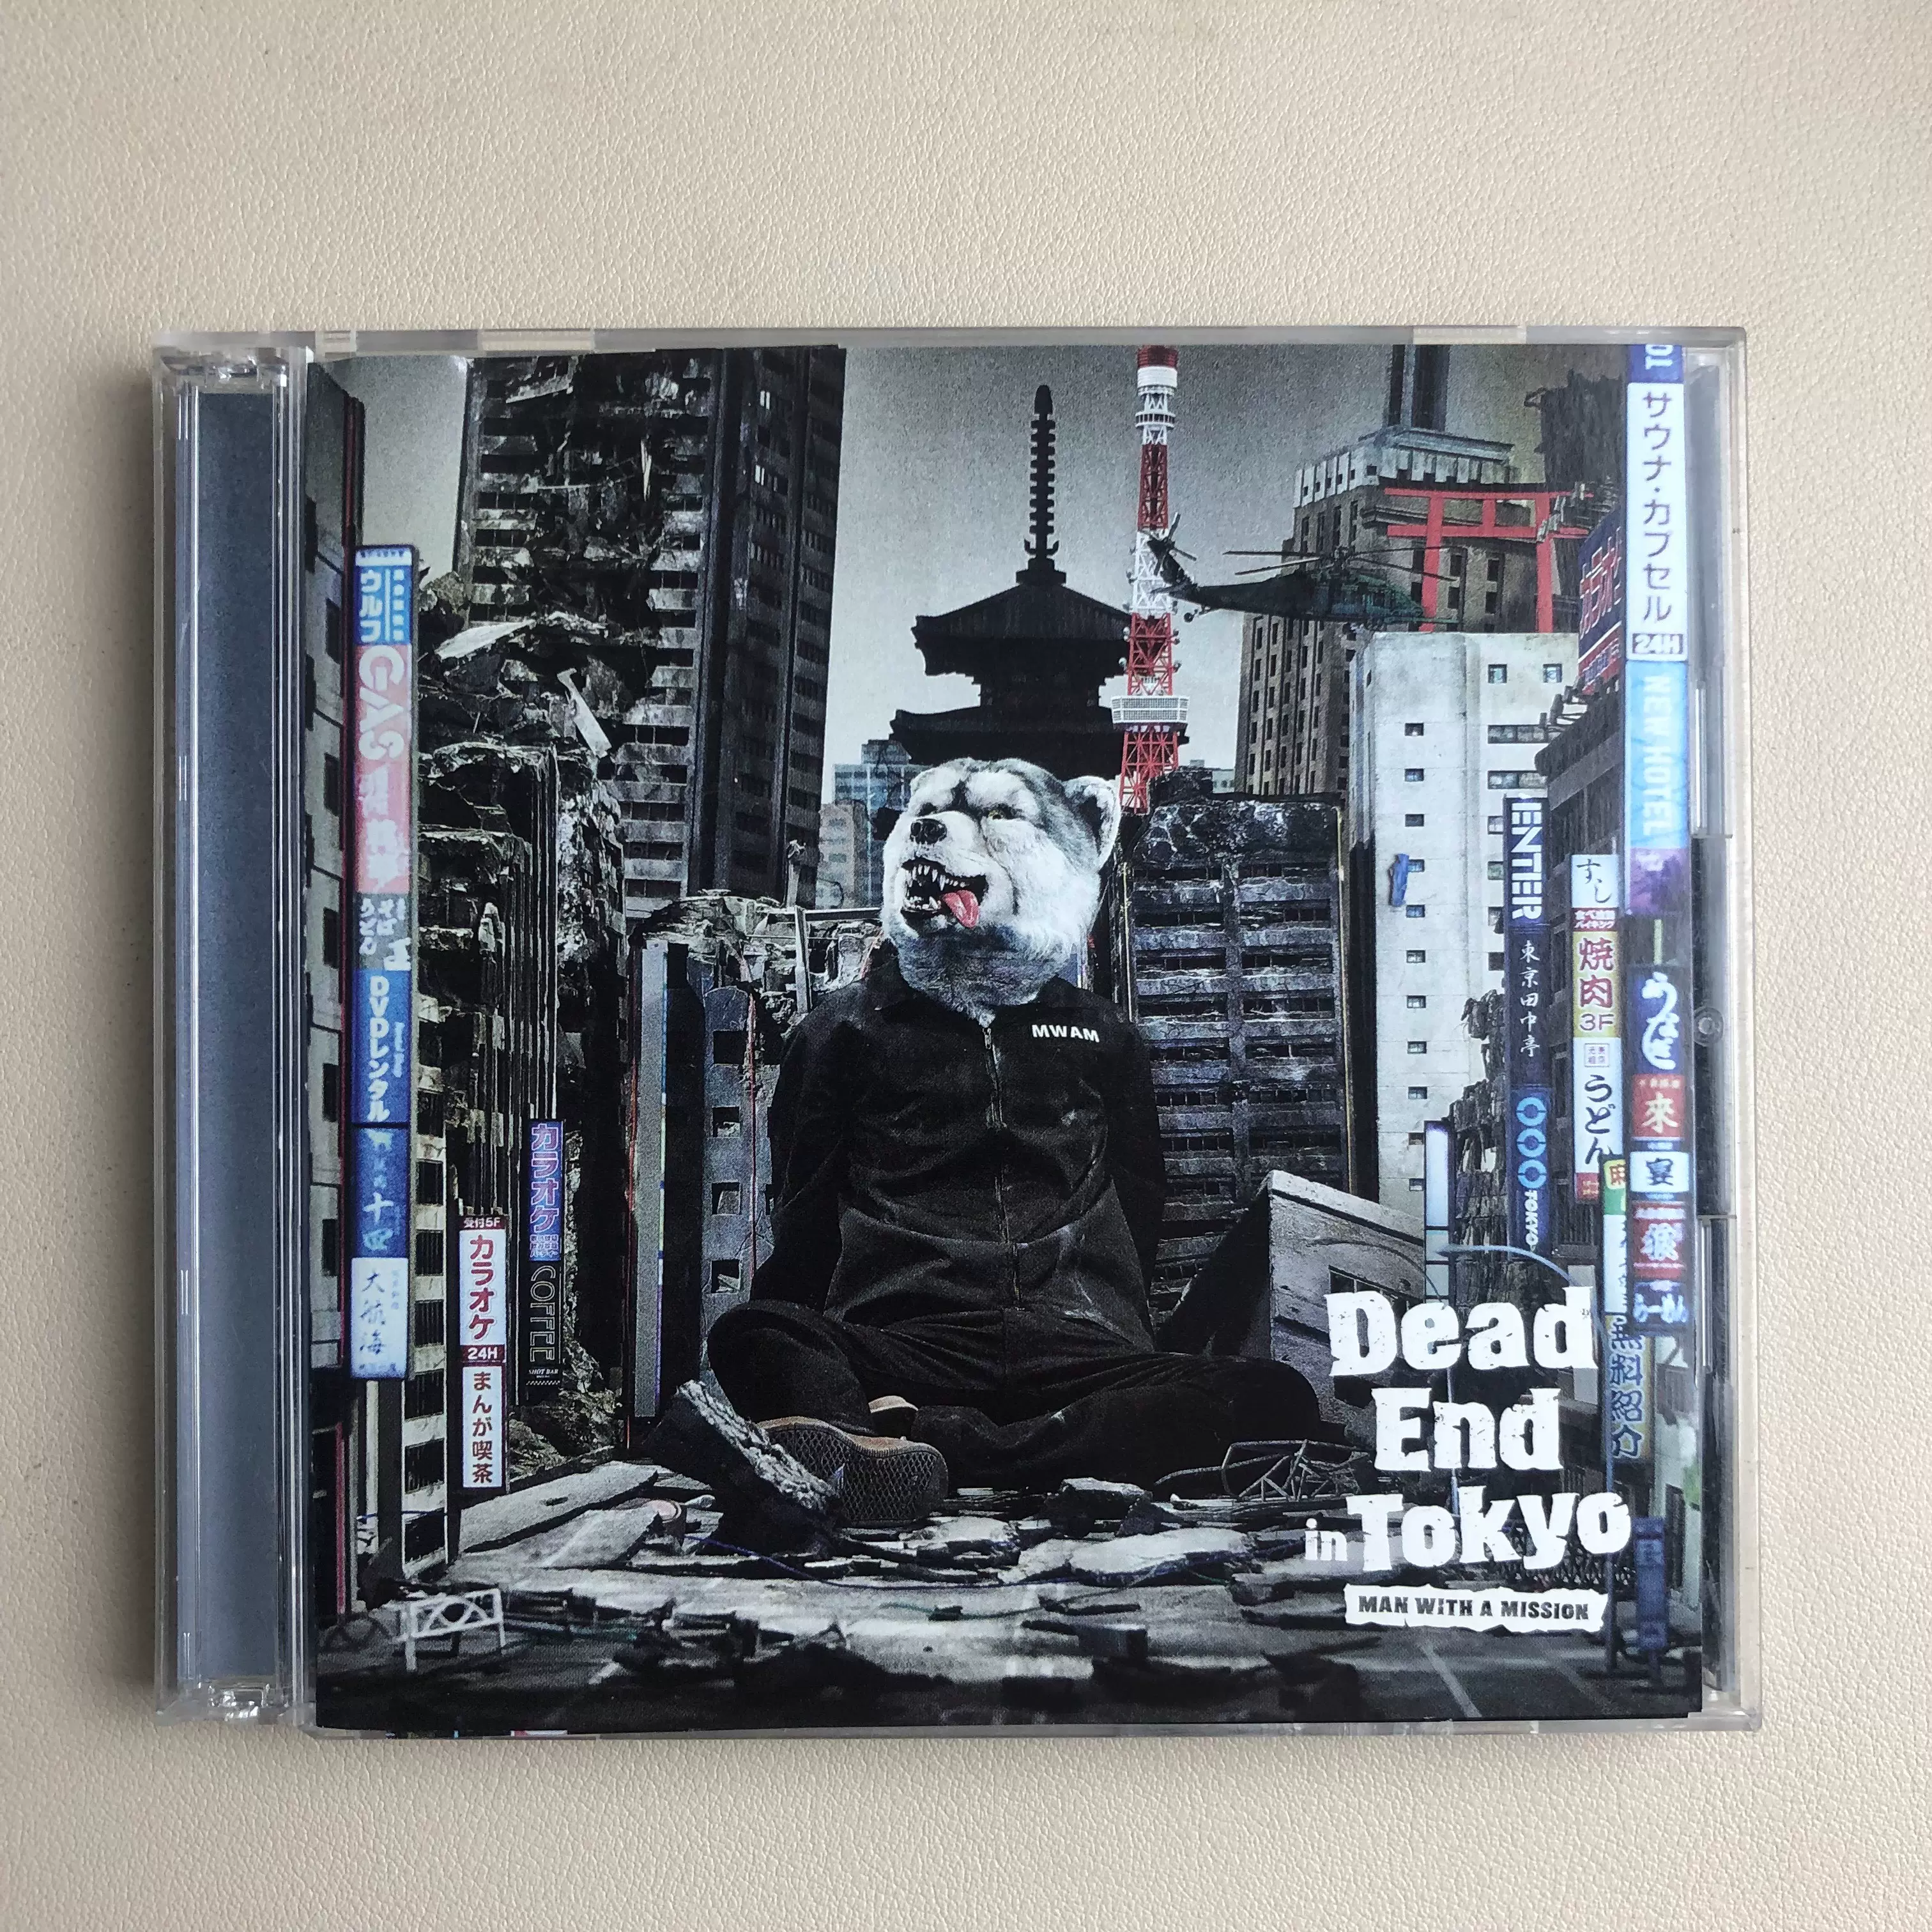 Man With A Mission Dead End In Tokyo 电子摇滚-Taobao